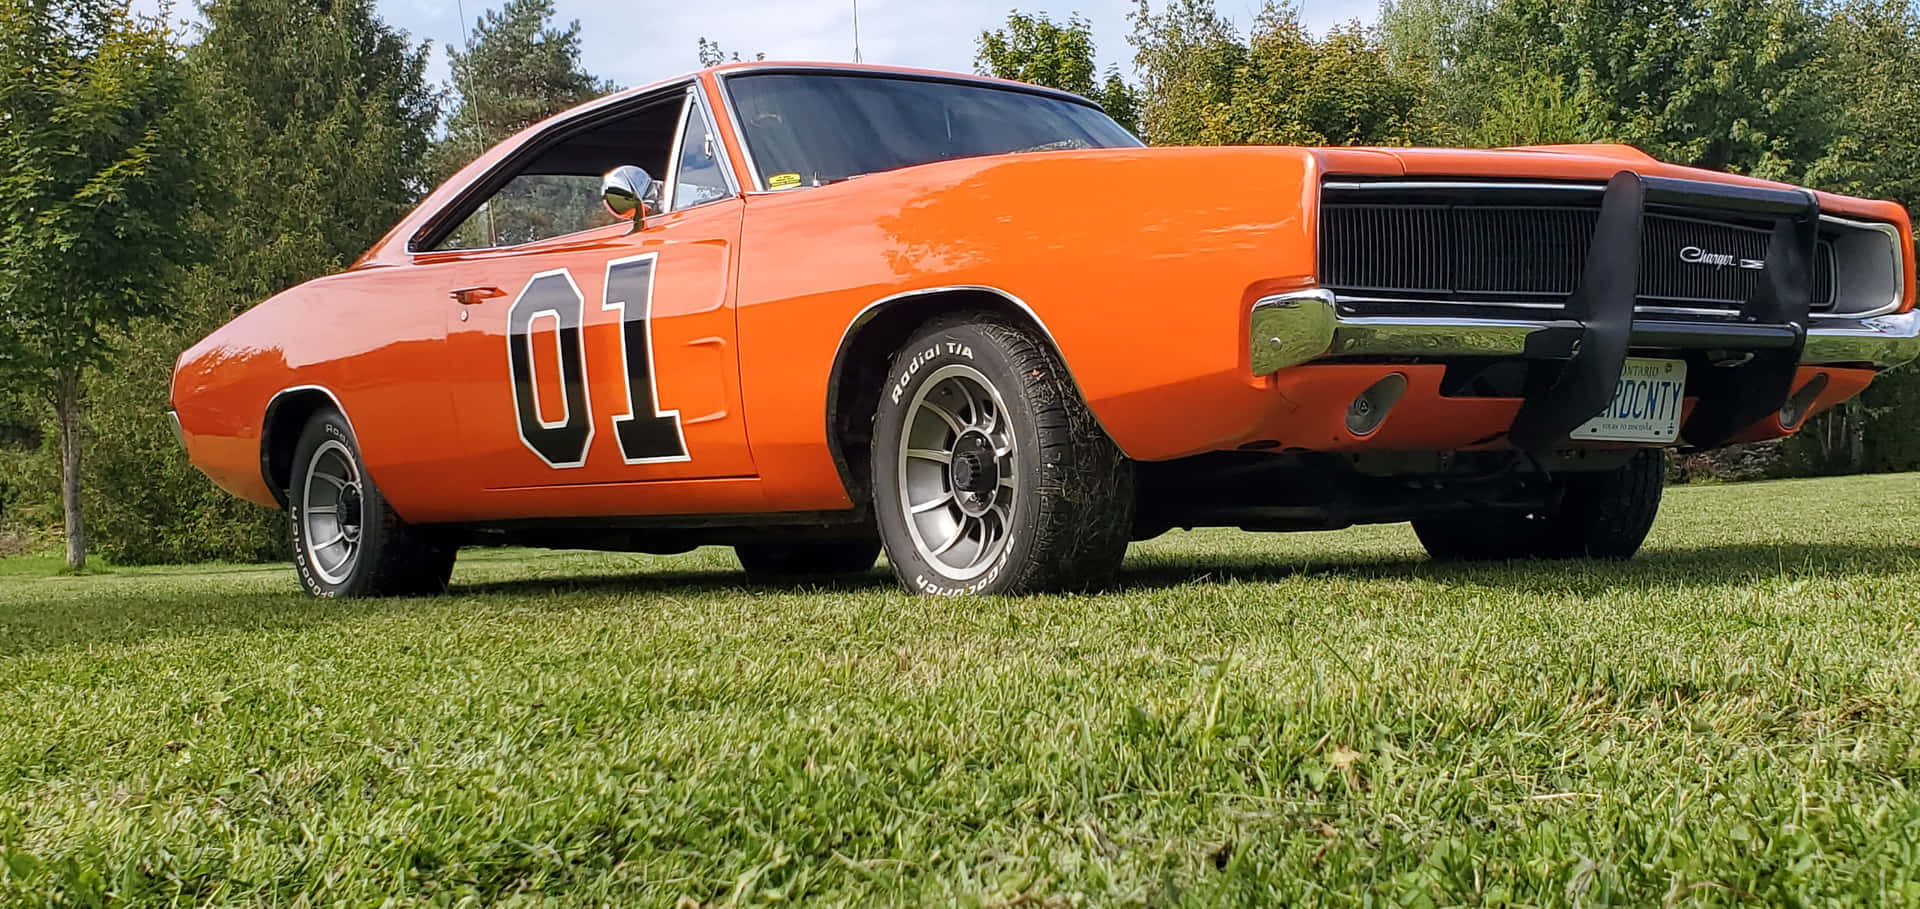 General Lee Car Parked On Grass Wallpaper